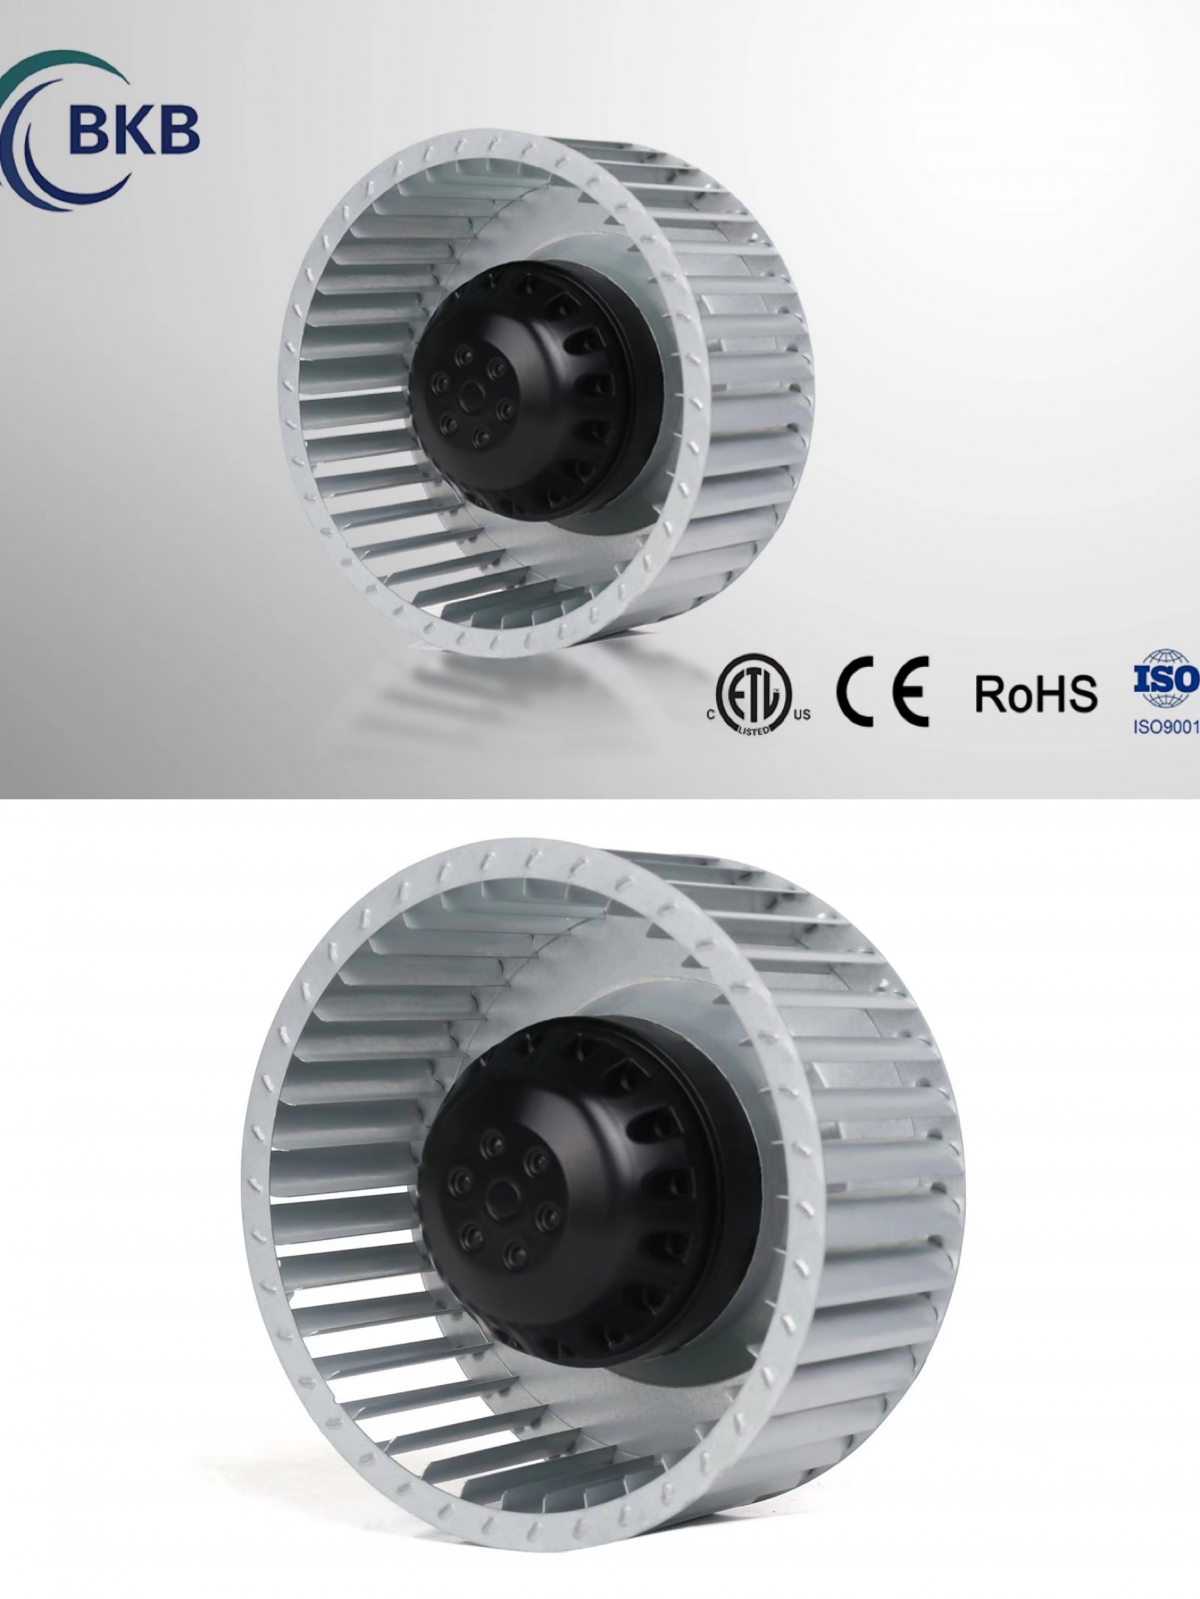 ETL APPROVED Steel backward curved centrifugal fan SUPPLIER AND FACTORY IN CHINA .-SUNLIGHT BLOWER,Centrifugal Fans, Inline Fans,Motors,Backward curved centrifugal fans ,Forward curved centrifugal fans ,inlet fans, EC fans